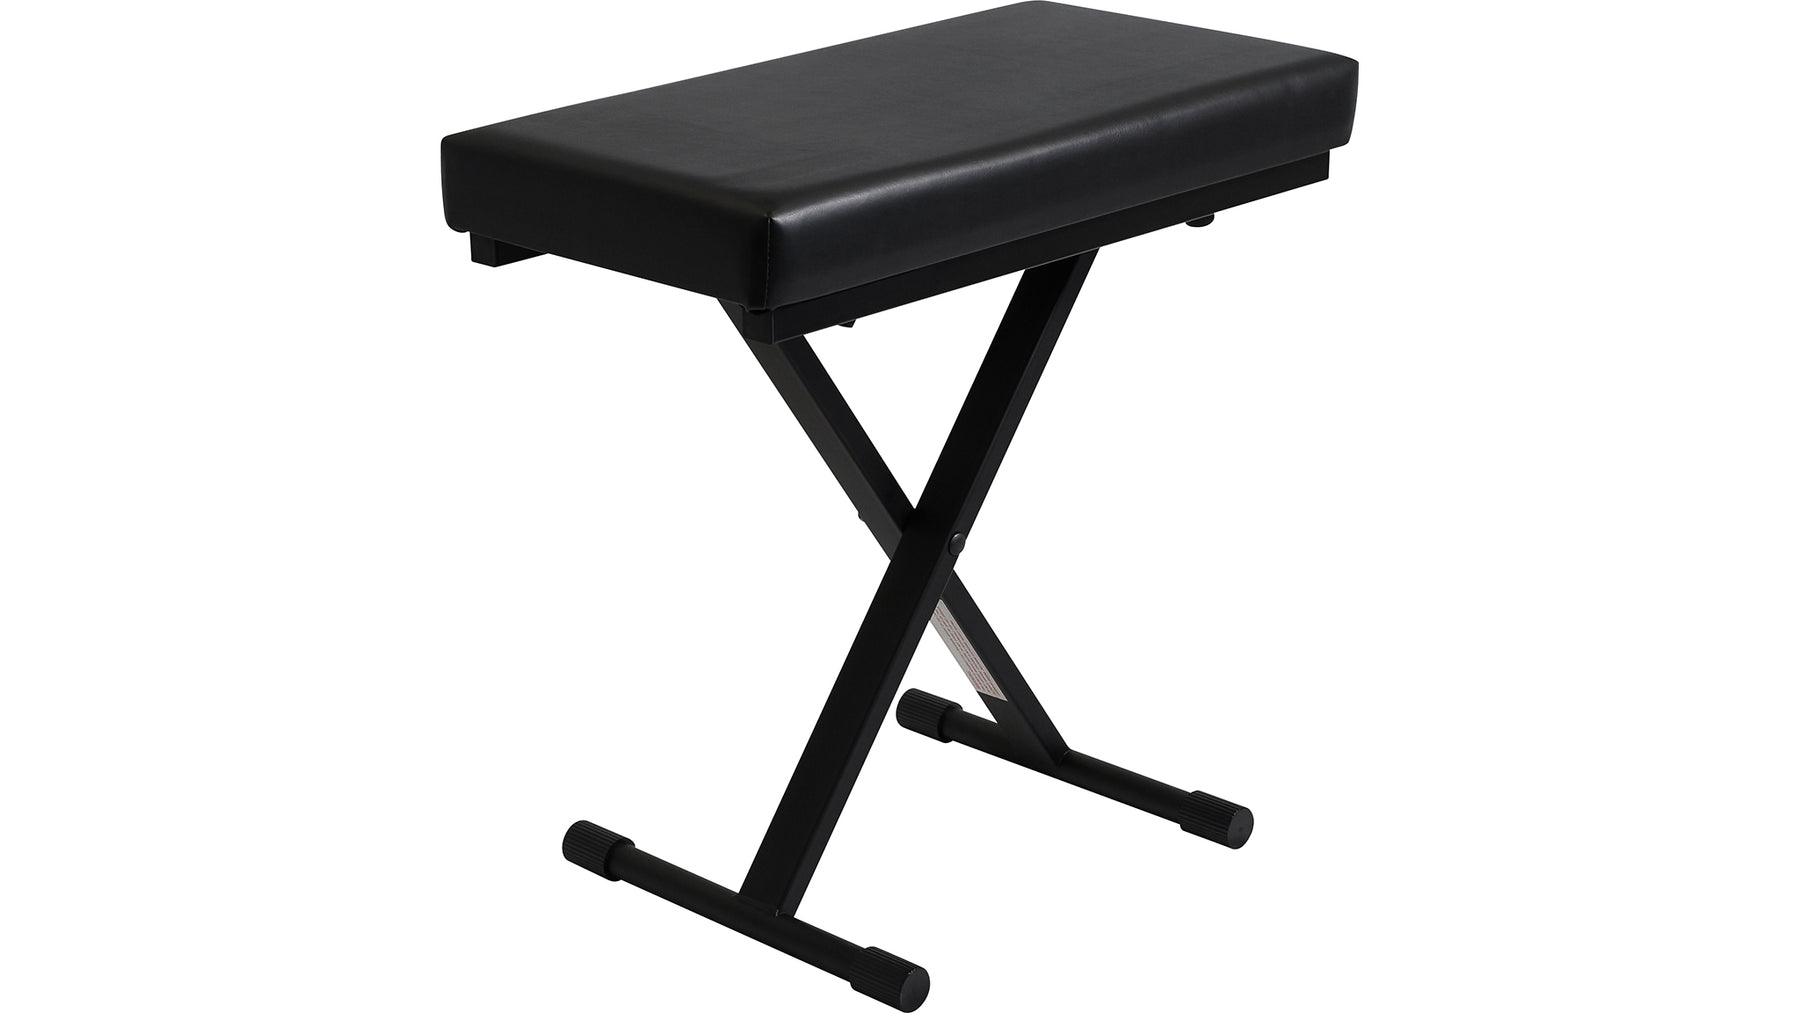 Keyboard Stand with Bench